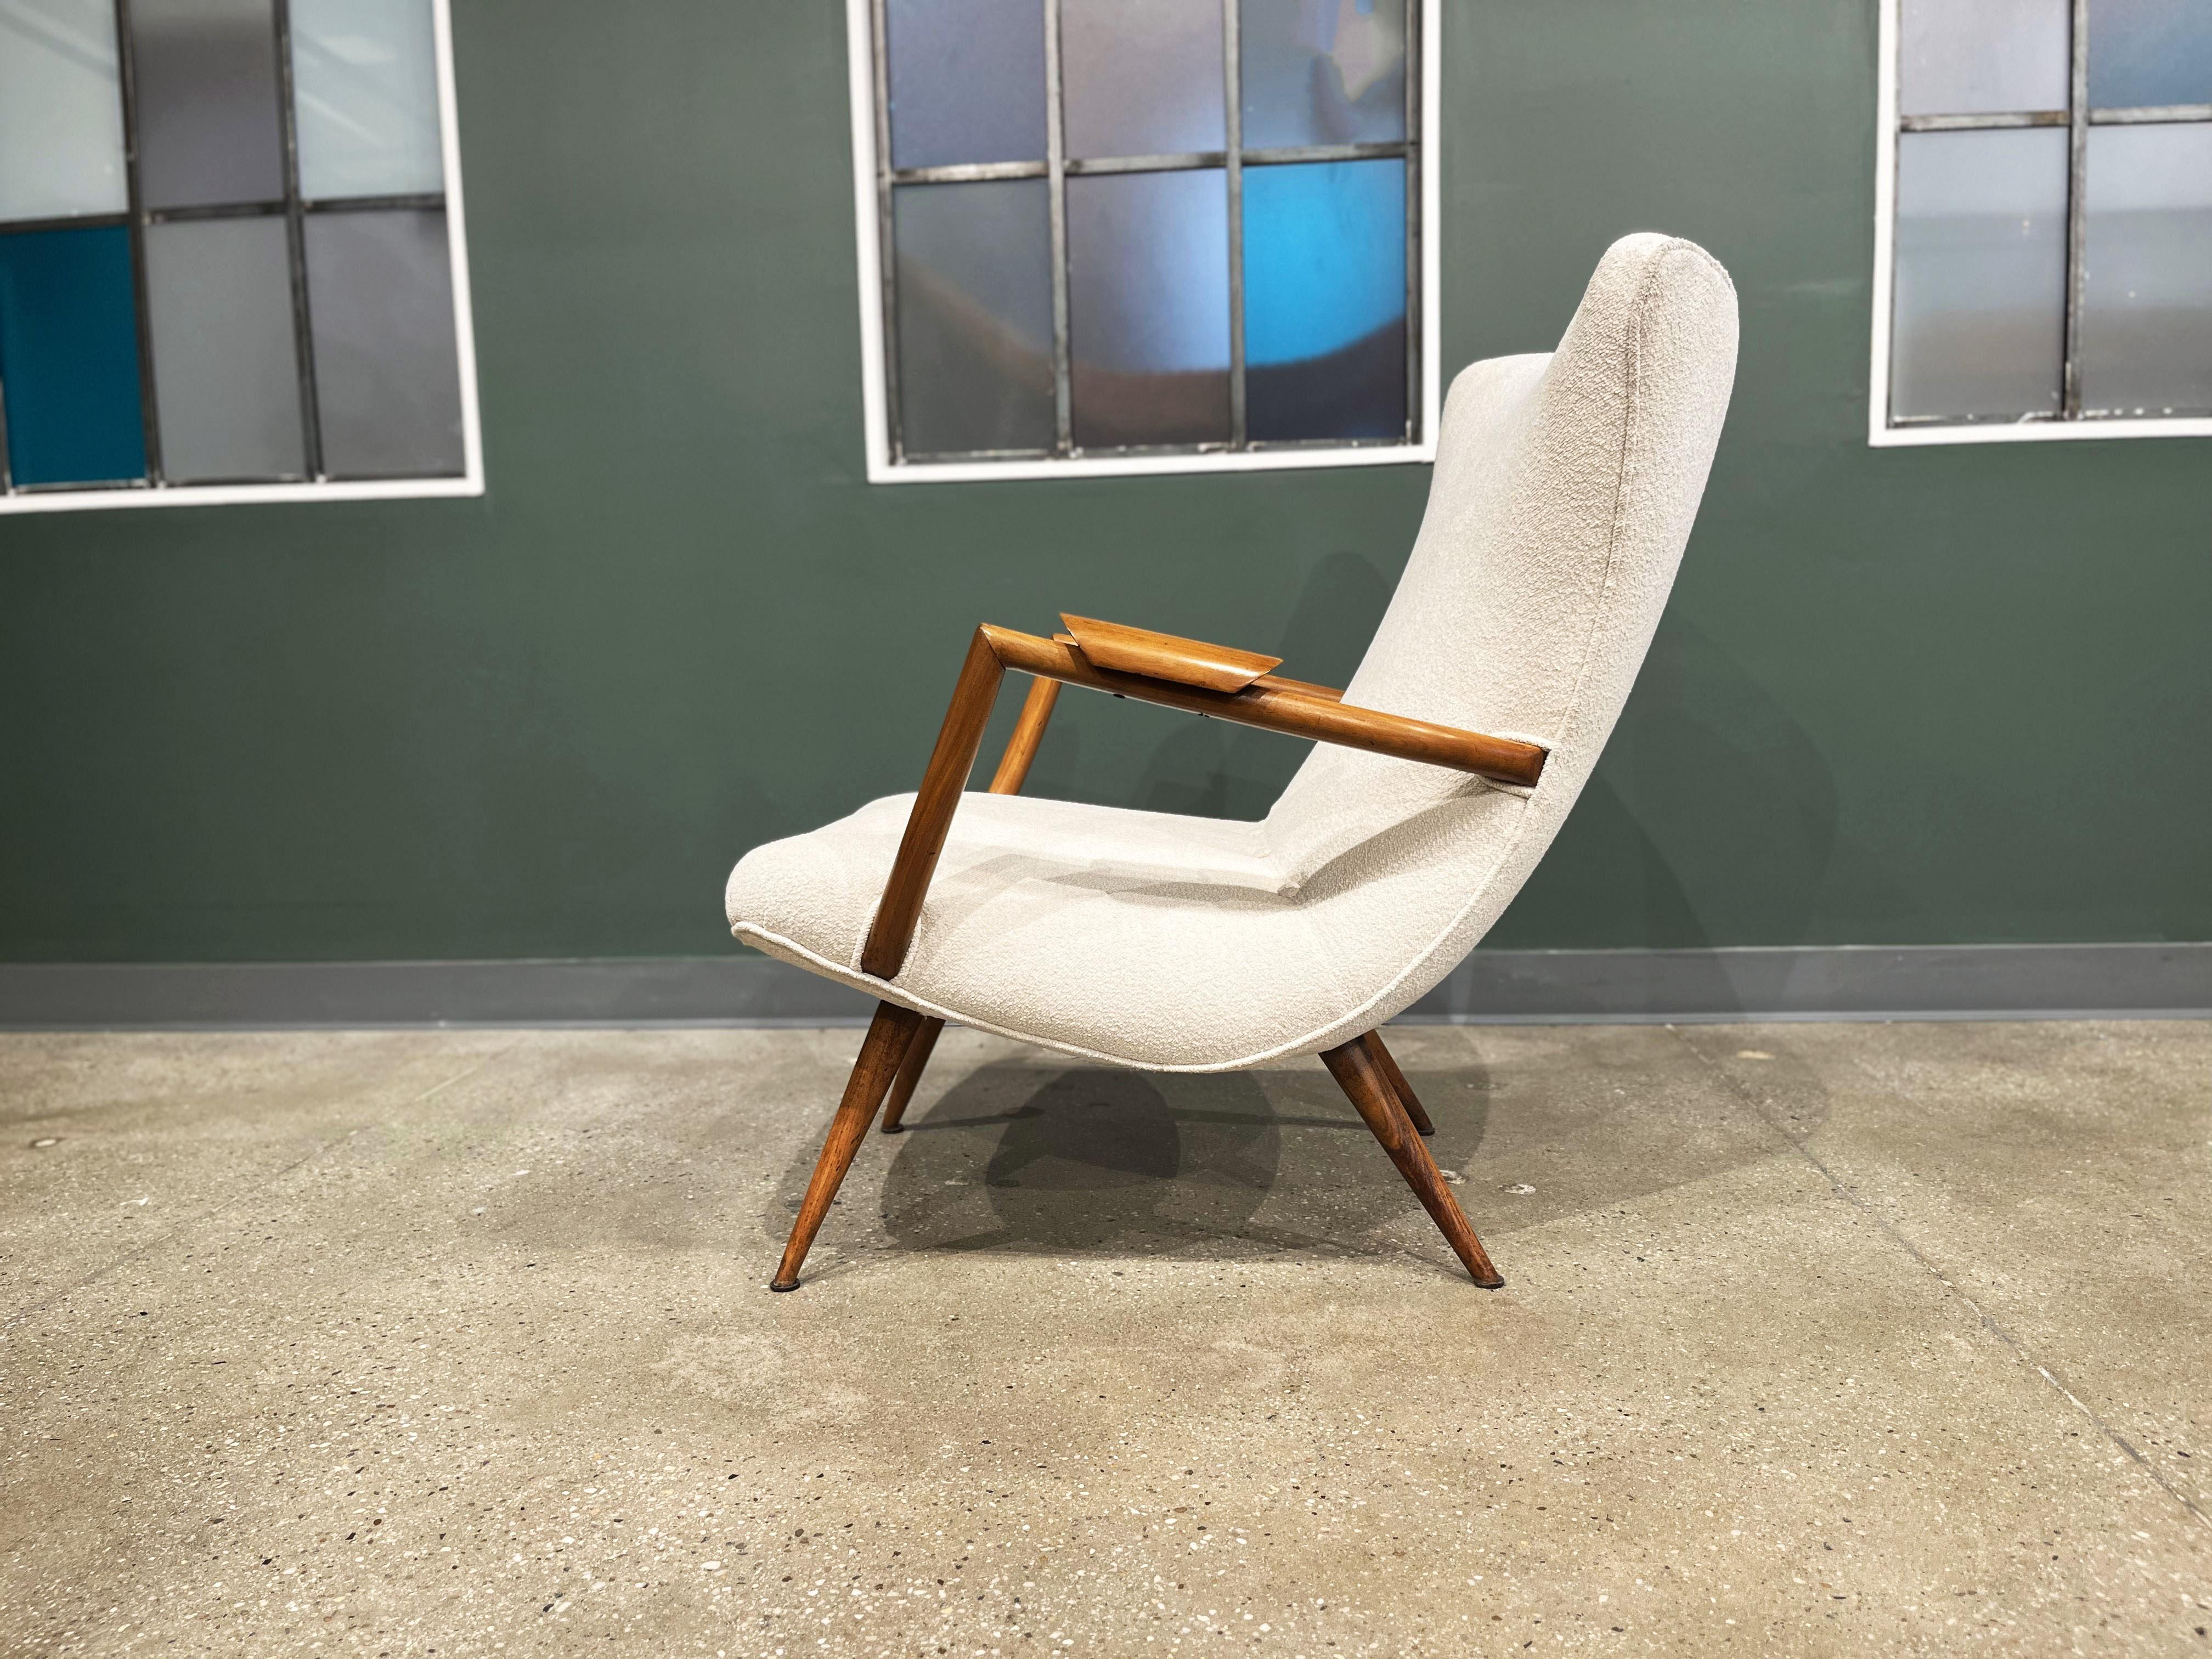 Available today in NY, this Brazilian Modern Pair of Armchairs in Caviuna Wood & Boucle by Giuseppe Scapinelli, are stunning!

The frames of this chair is made with Caviuna hardwood and the seat and backrest is upholstered in a white boucle fabric.